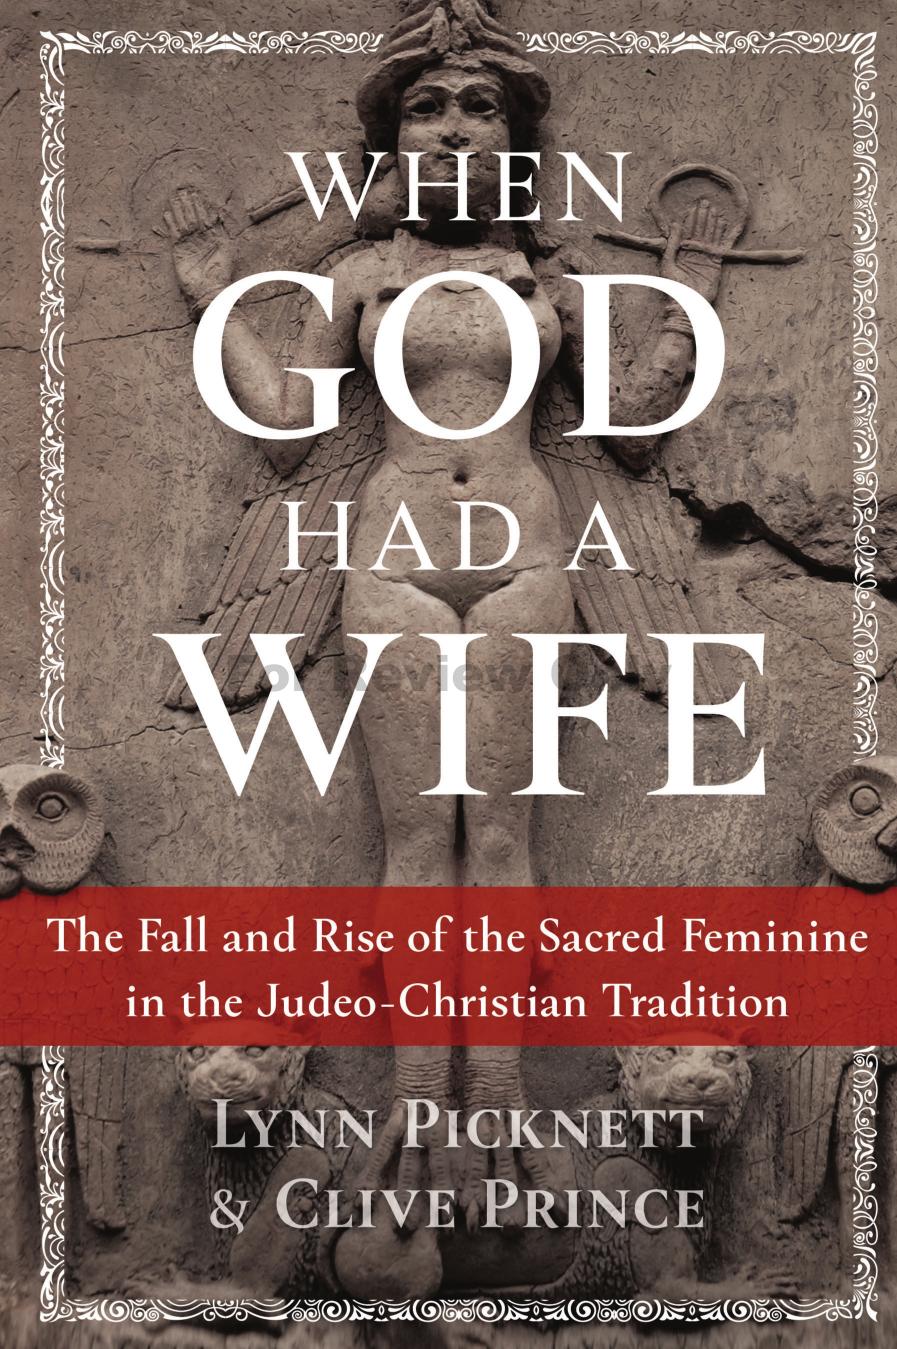 When God Had a Wife: The Fall and Rise of the Sacred Feminine in the Judeo-Christian Tradition